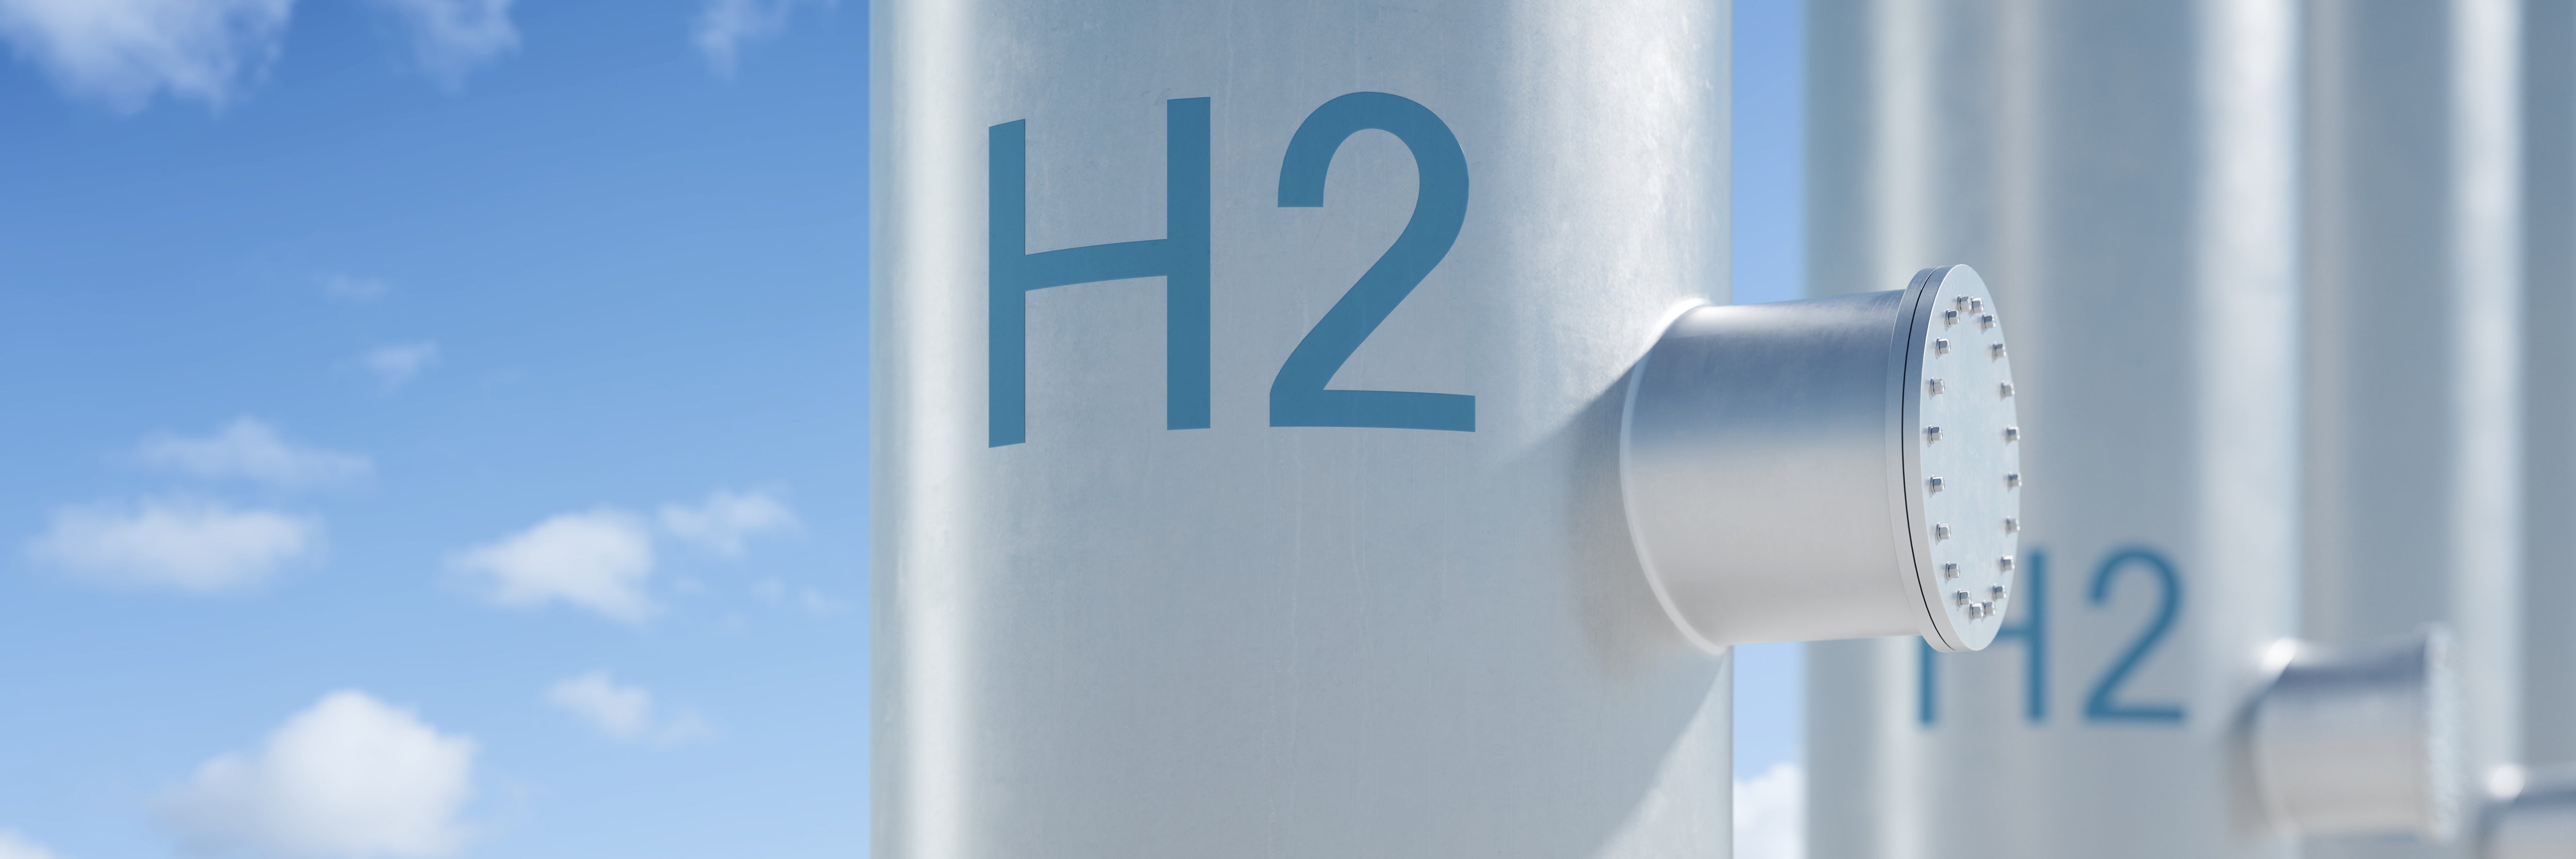 Hydrogen pipe with periodic table number